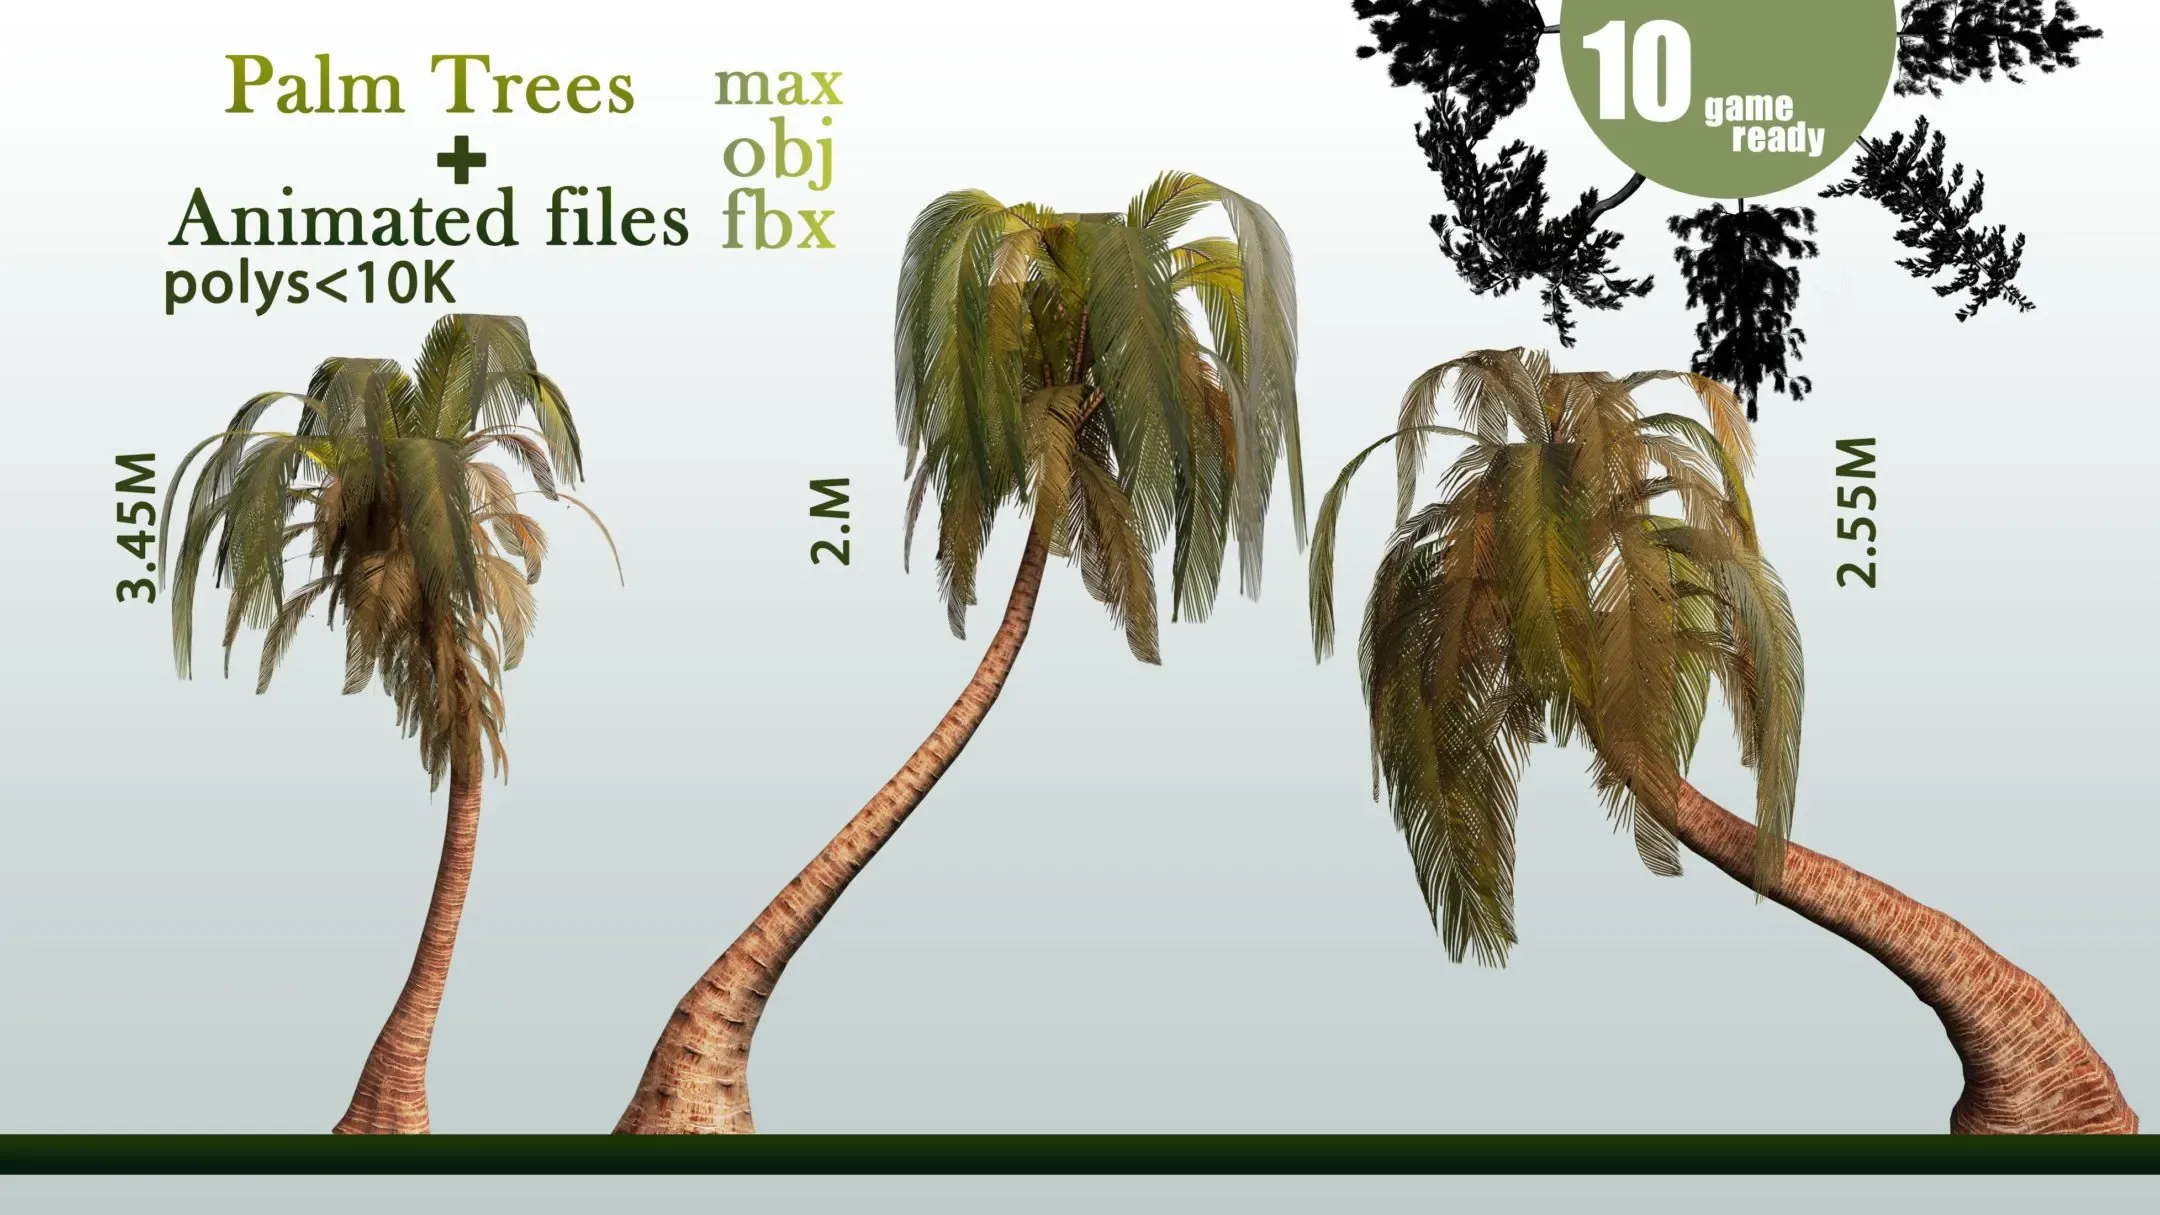 10 Palm Trees VOL 04+ Animated Files